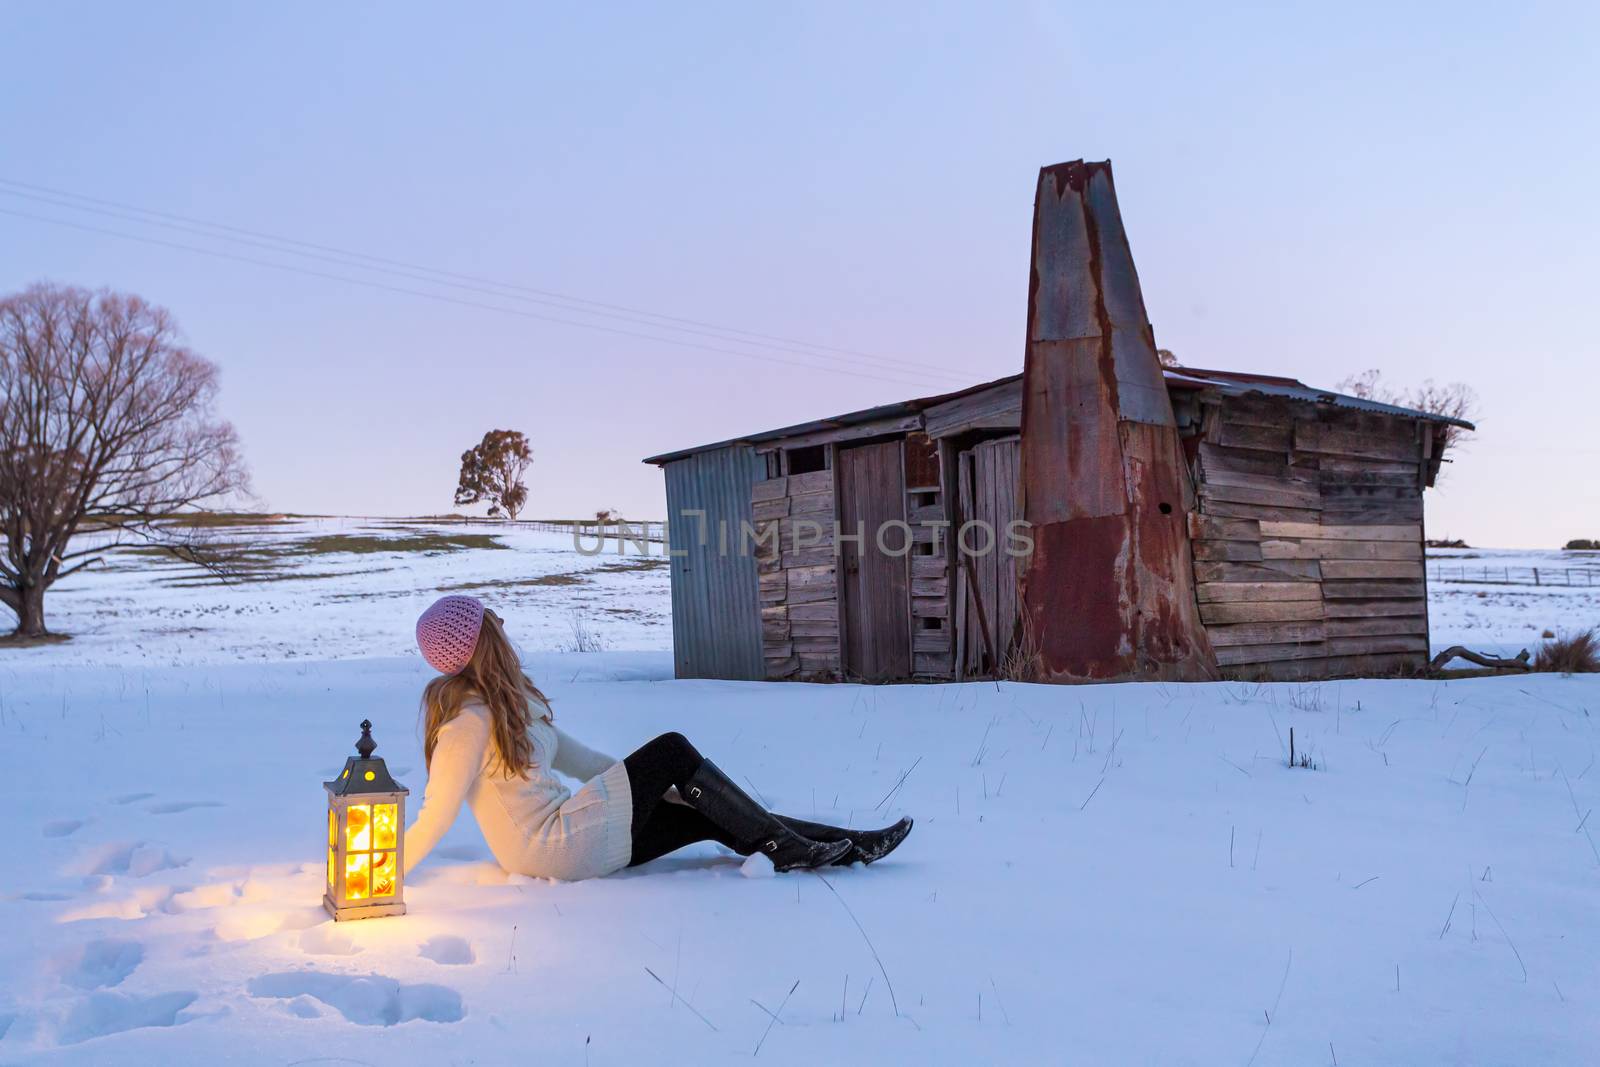 Woman with lantern sitting in a snow covered field.  The day is drawing to a close and the cool dusk colours envelop the landscape.  A rustic stable shed  of mismatched timber and metal nearby